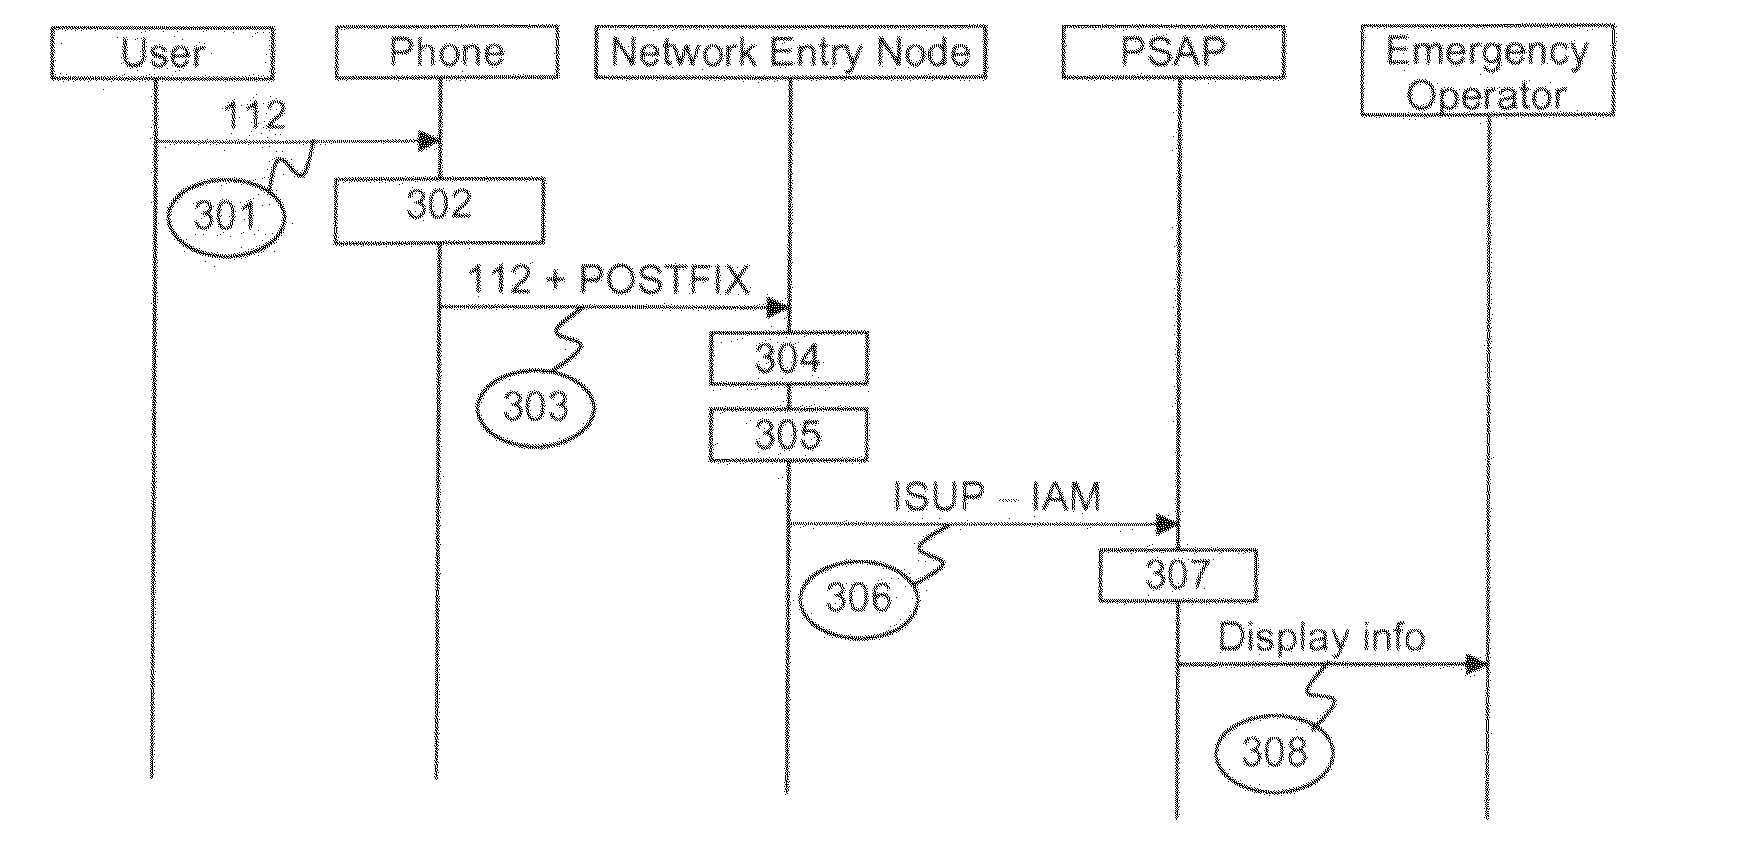 Method and system for adding information to an emergency call